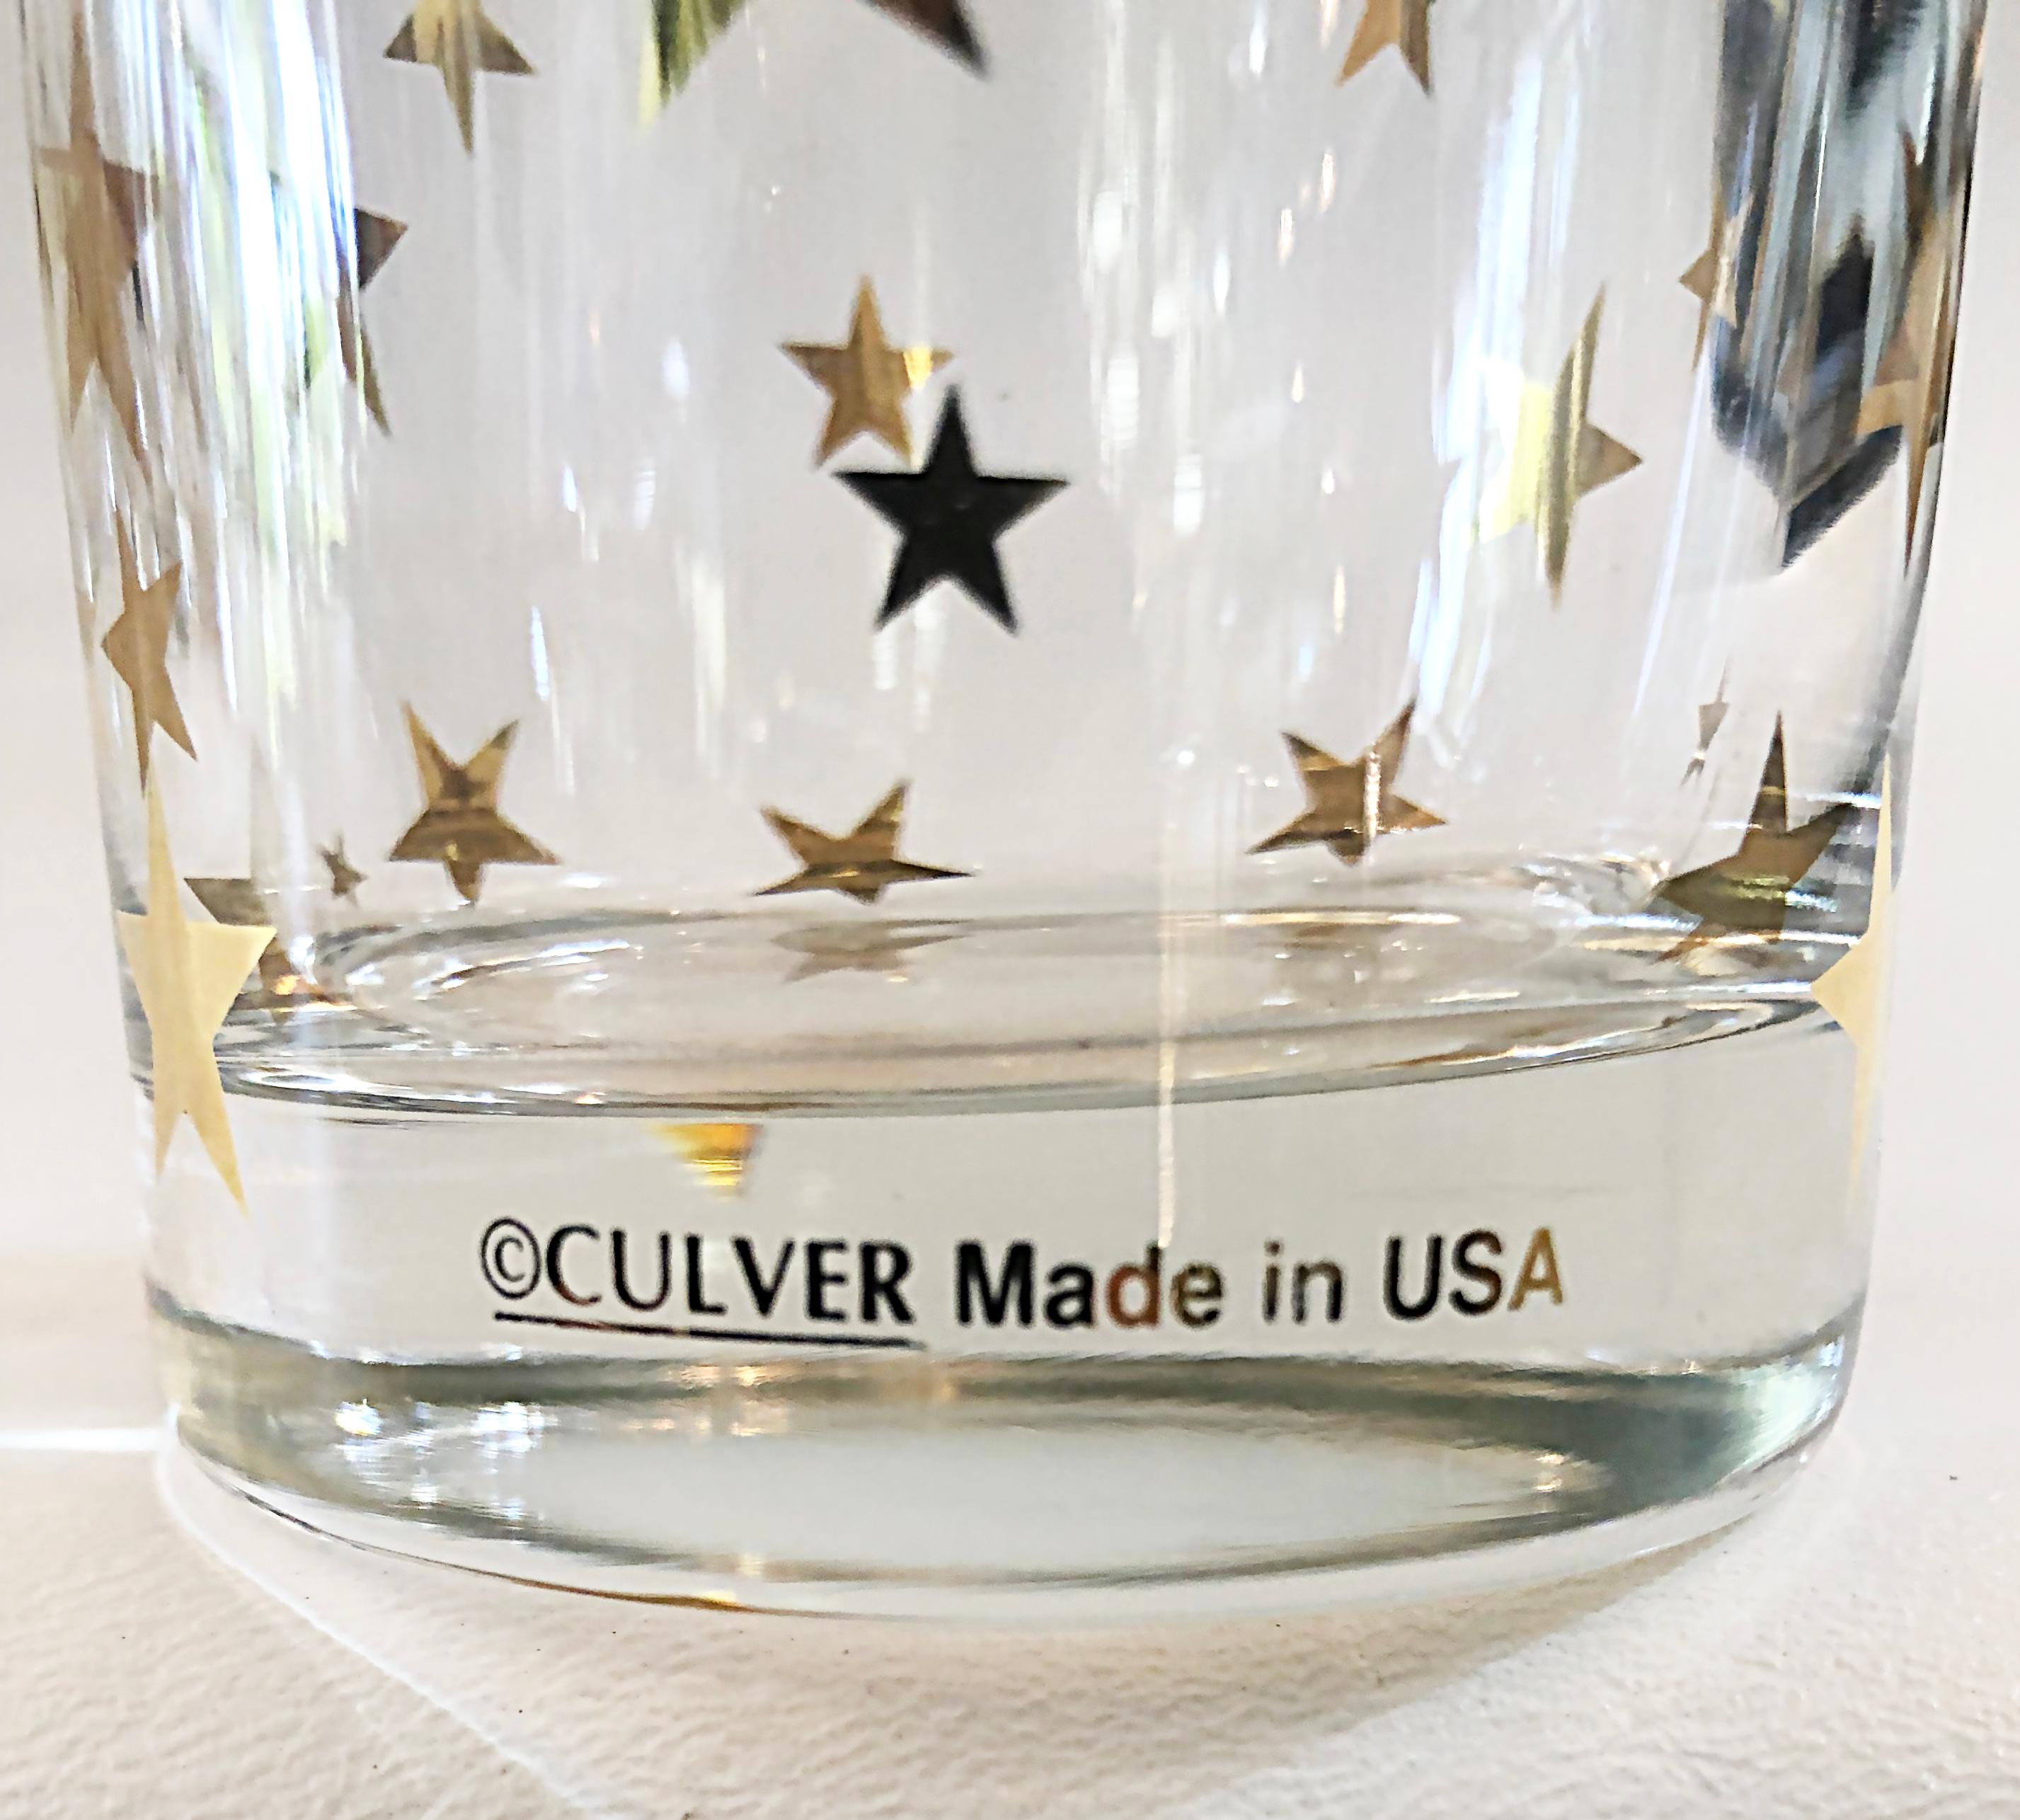 Culver Glass Co. Tumbler glasses, 22 carat gold stars set of 6

Offered for sale is set of six tall tumbler drinking glasses by Culver Glass company. The 1960s set is decorated with star patterns and marked Culver made in the USA on the sides near